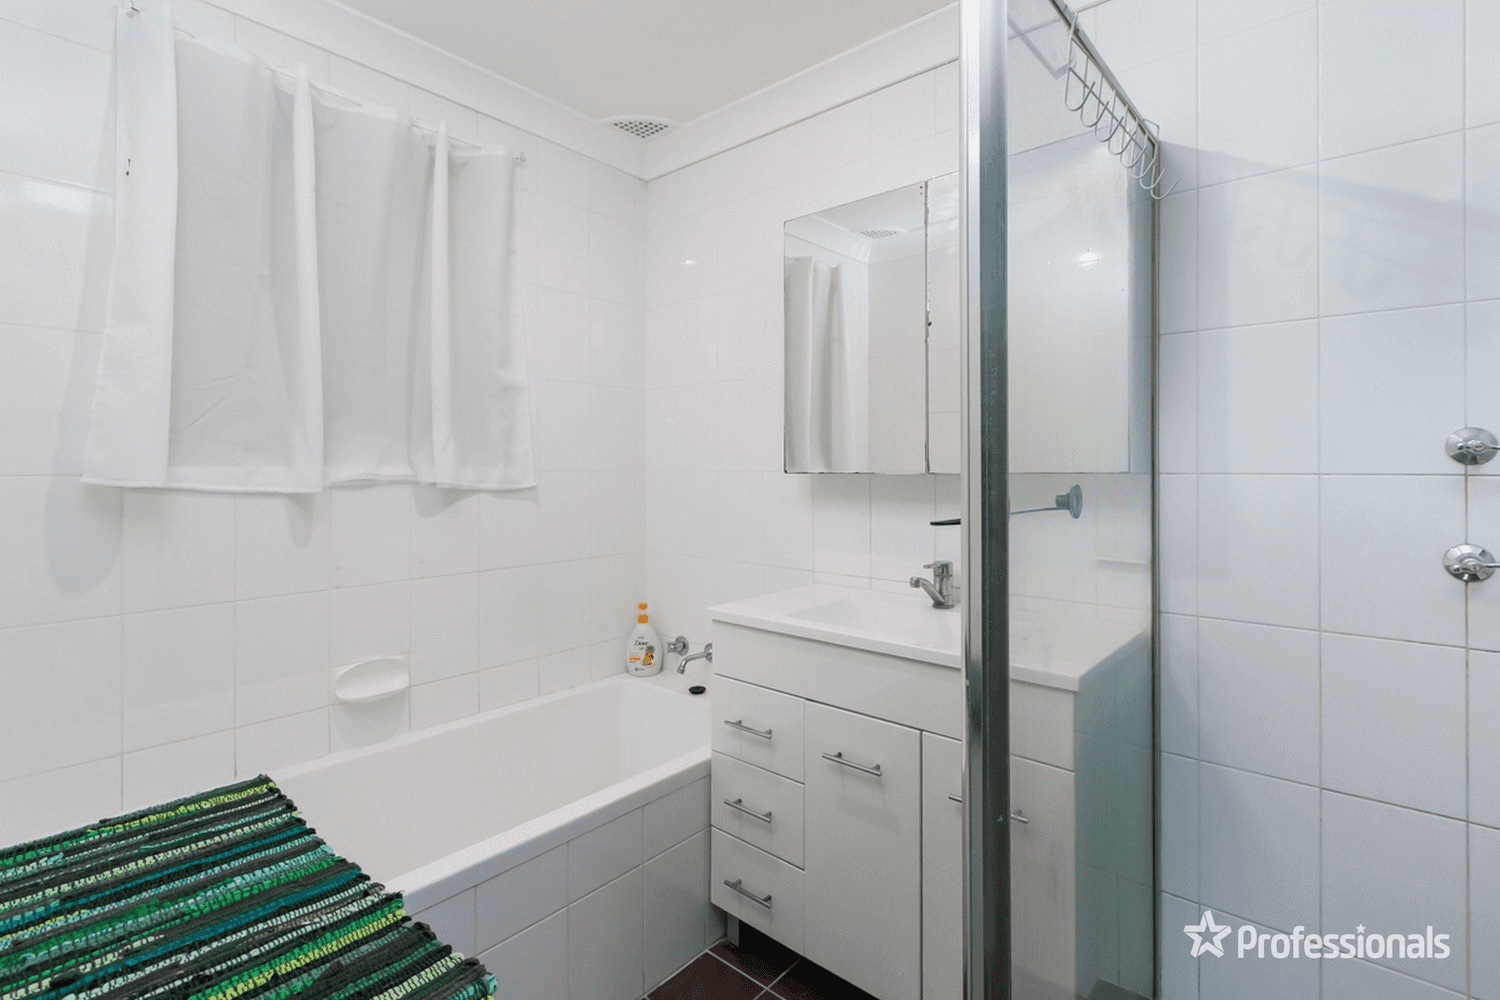 1 Maroni Place, St Clair, NSW 2759